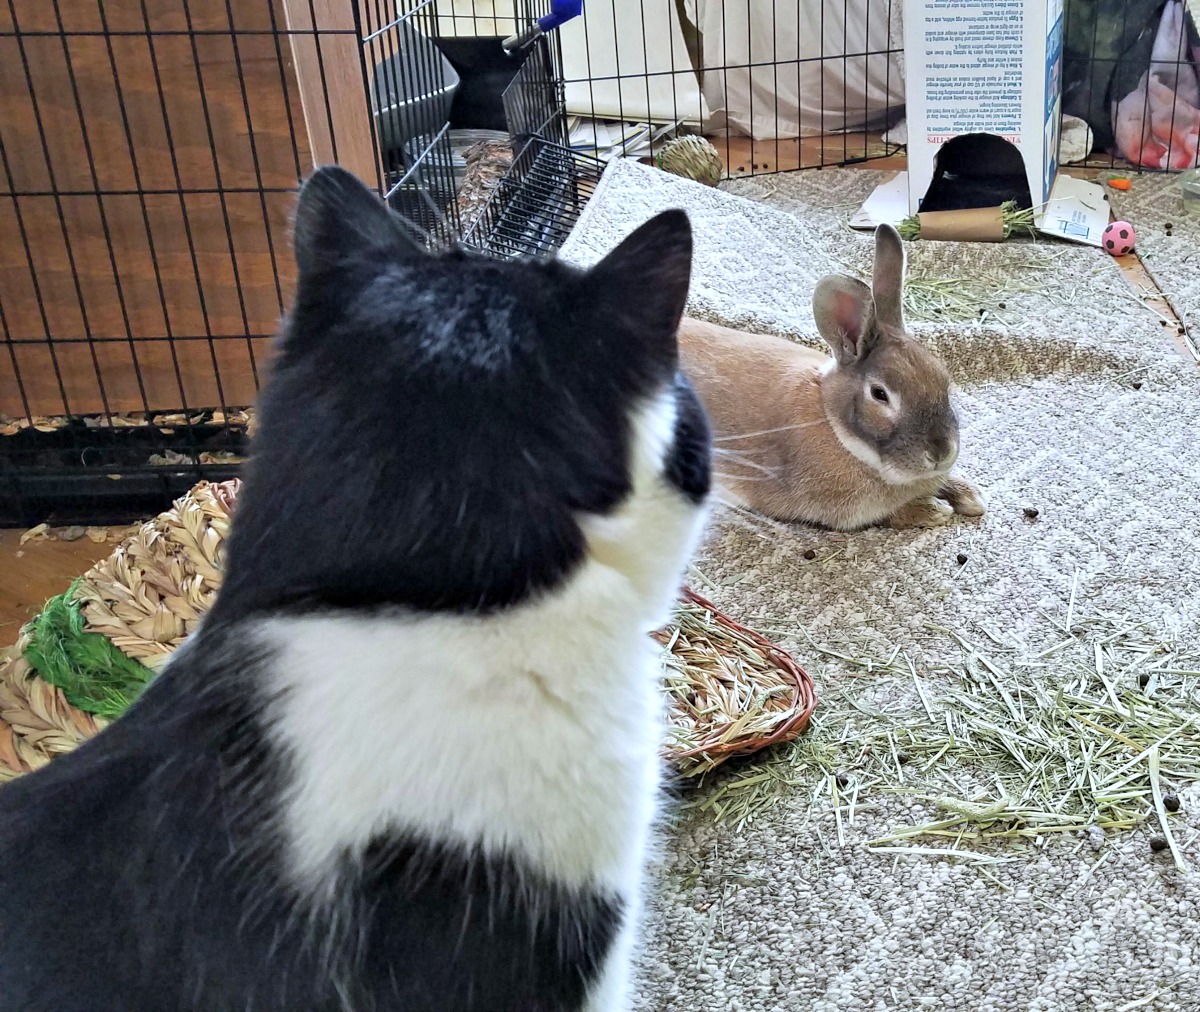 introducing a rescue rabbit to cats, rescue rabbit, cats